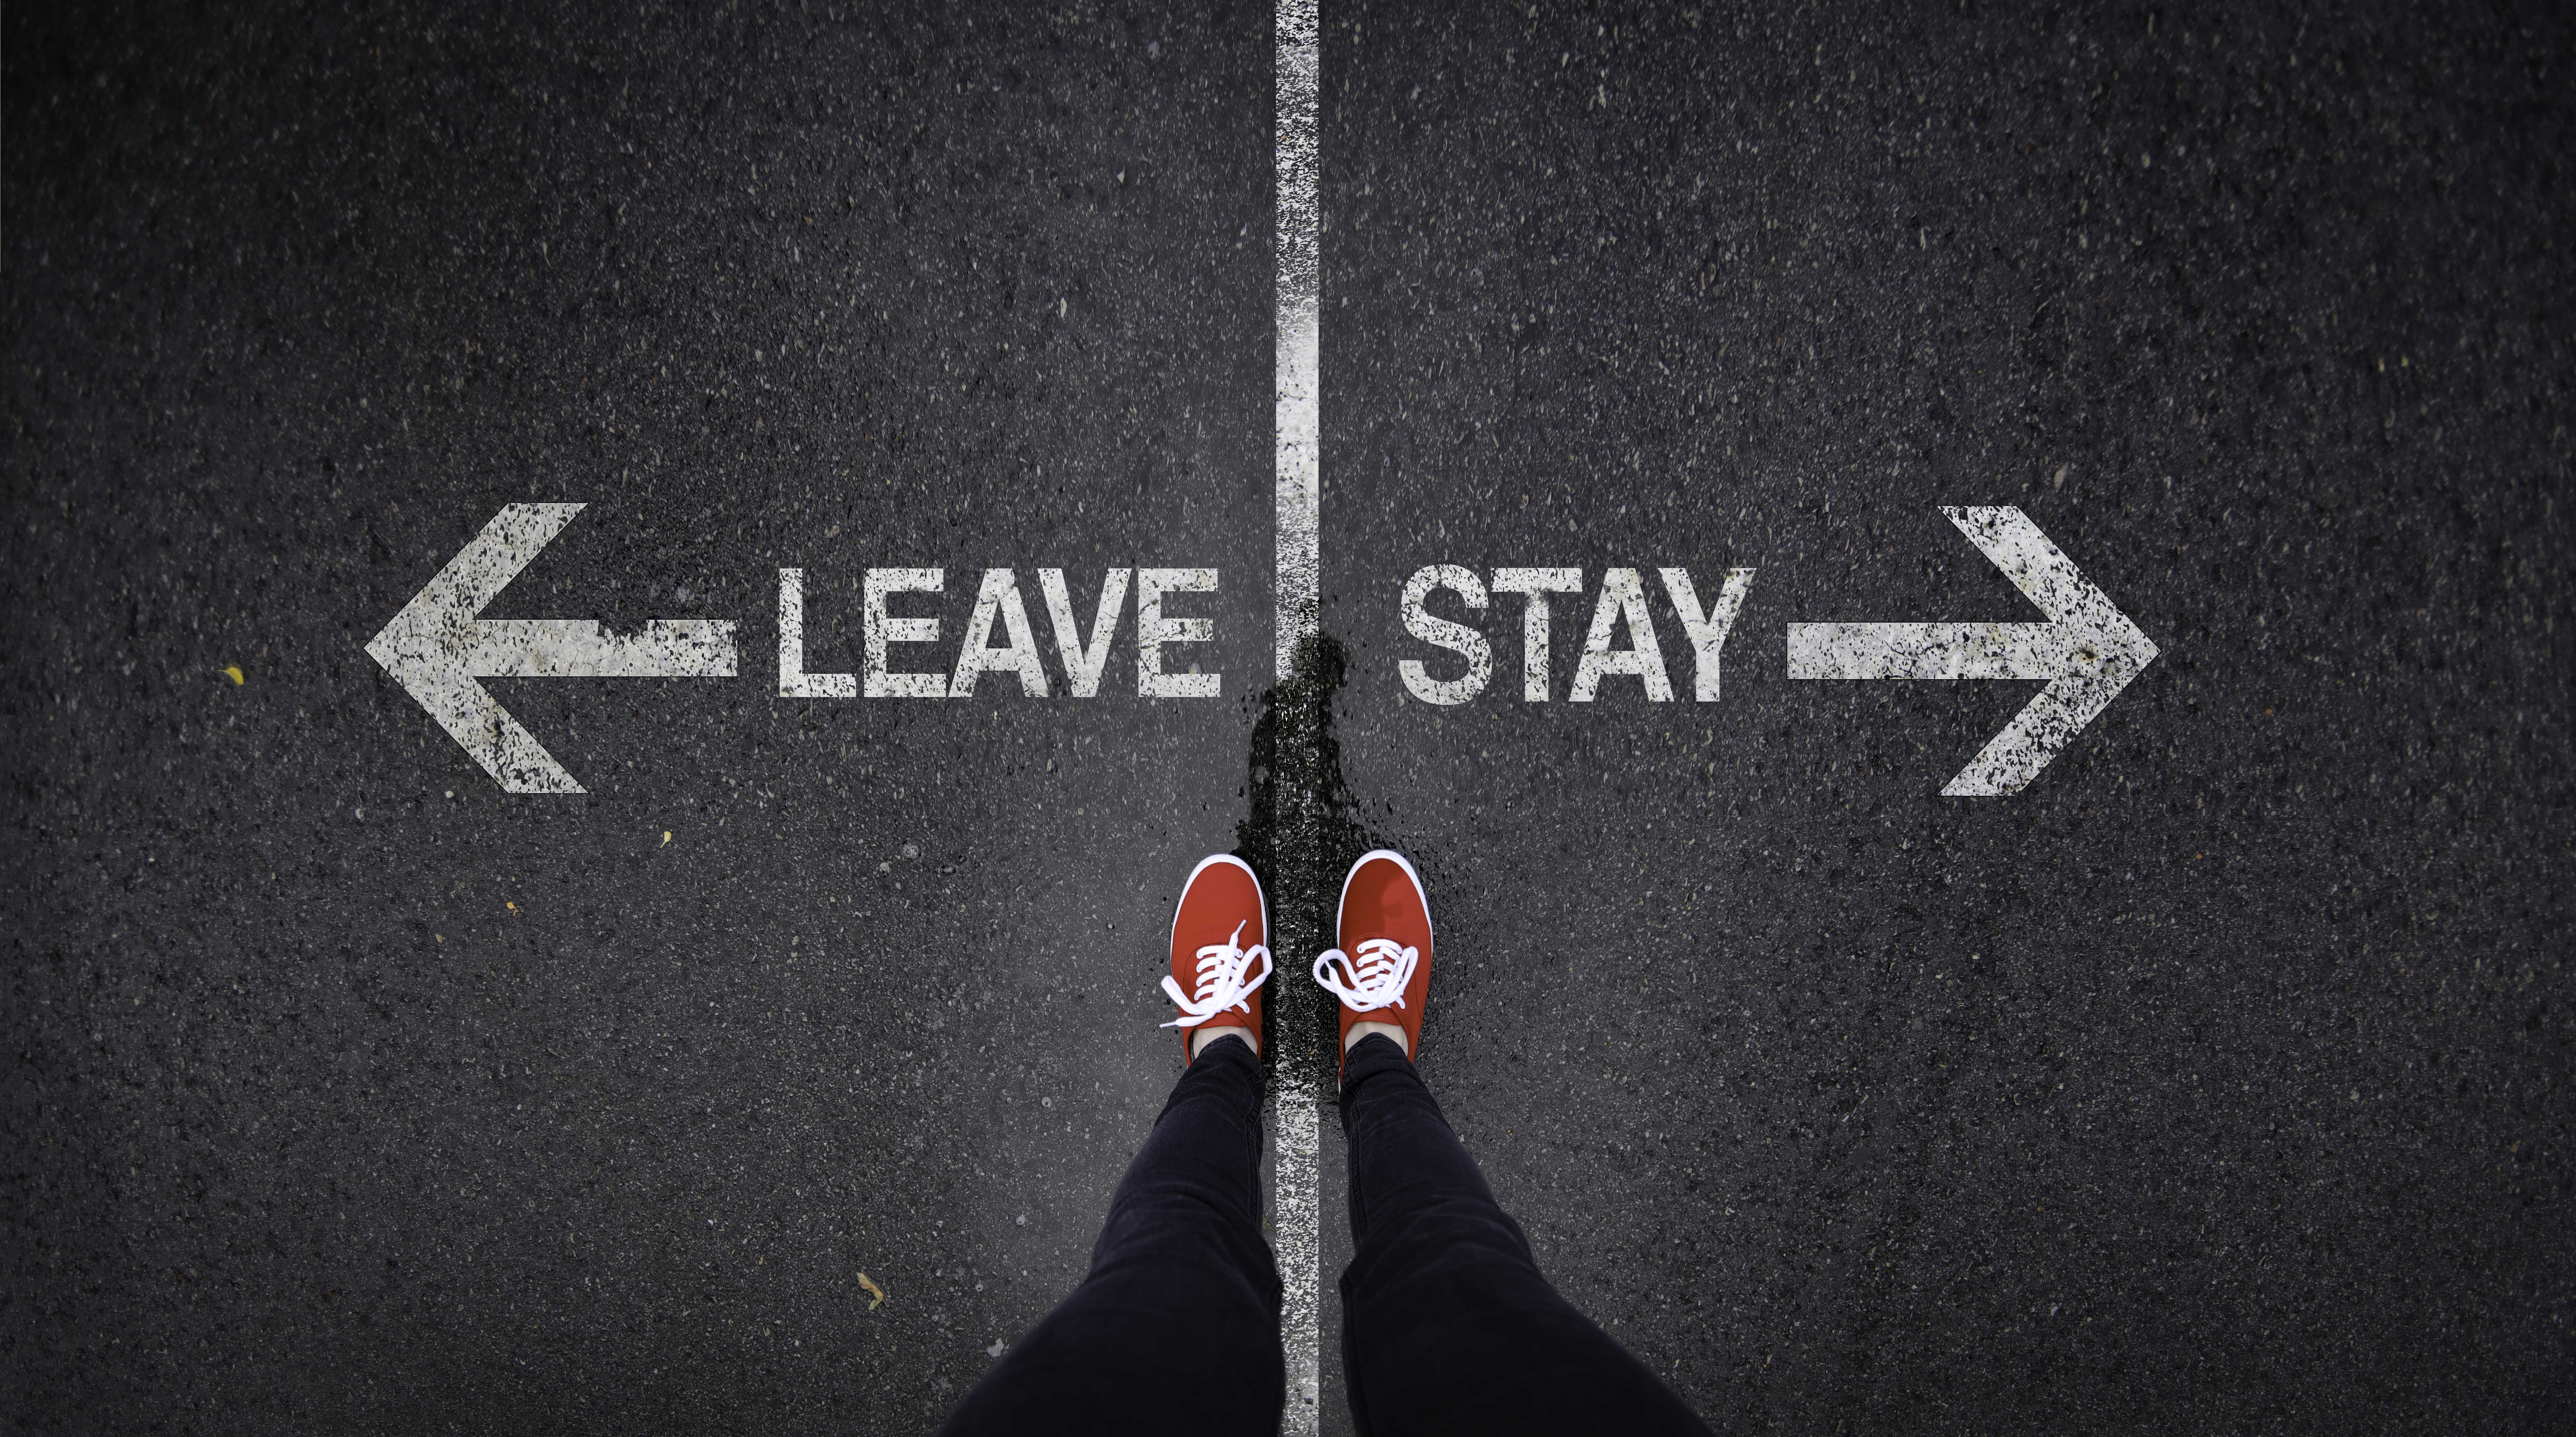 Stay never leave. Stay. Stay leave. Leave stay разница. Картинки one stay.